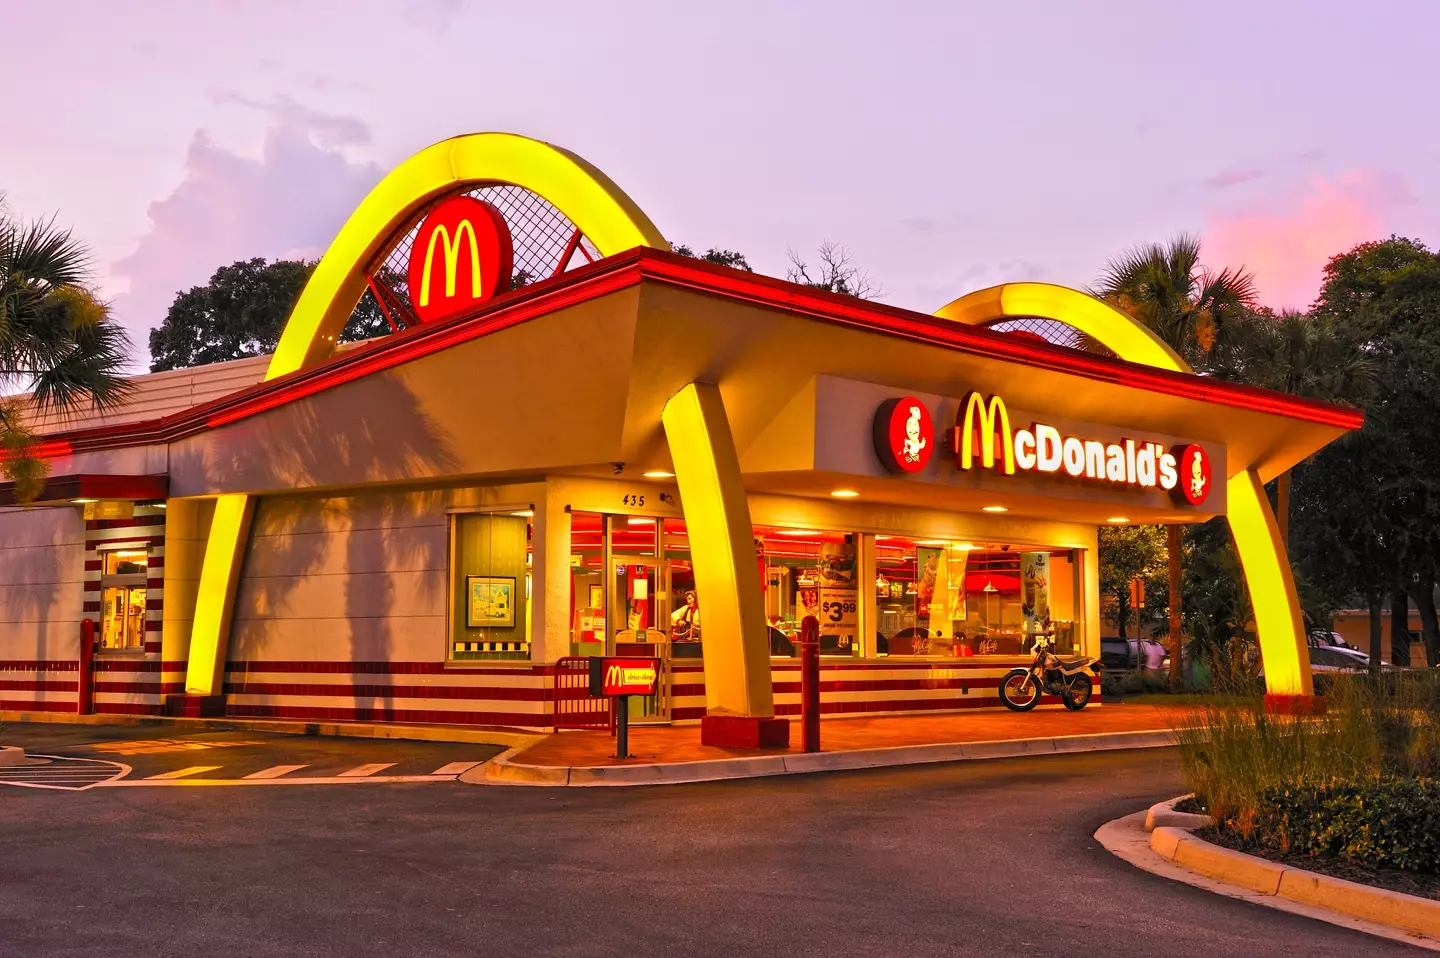 The Golden Arches allegedly have a very NSFW meaning.